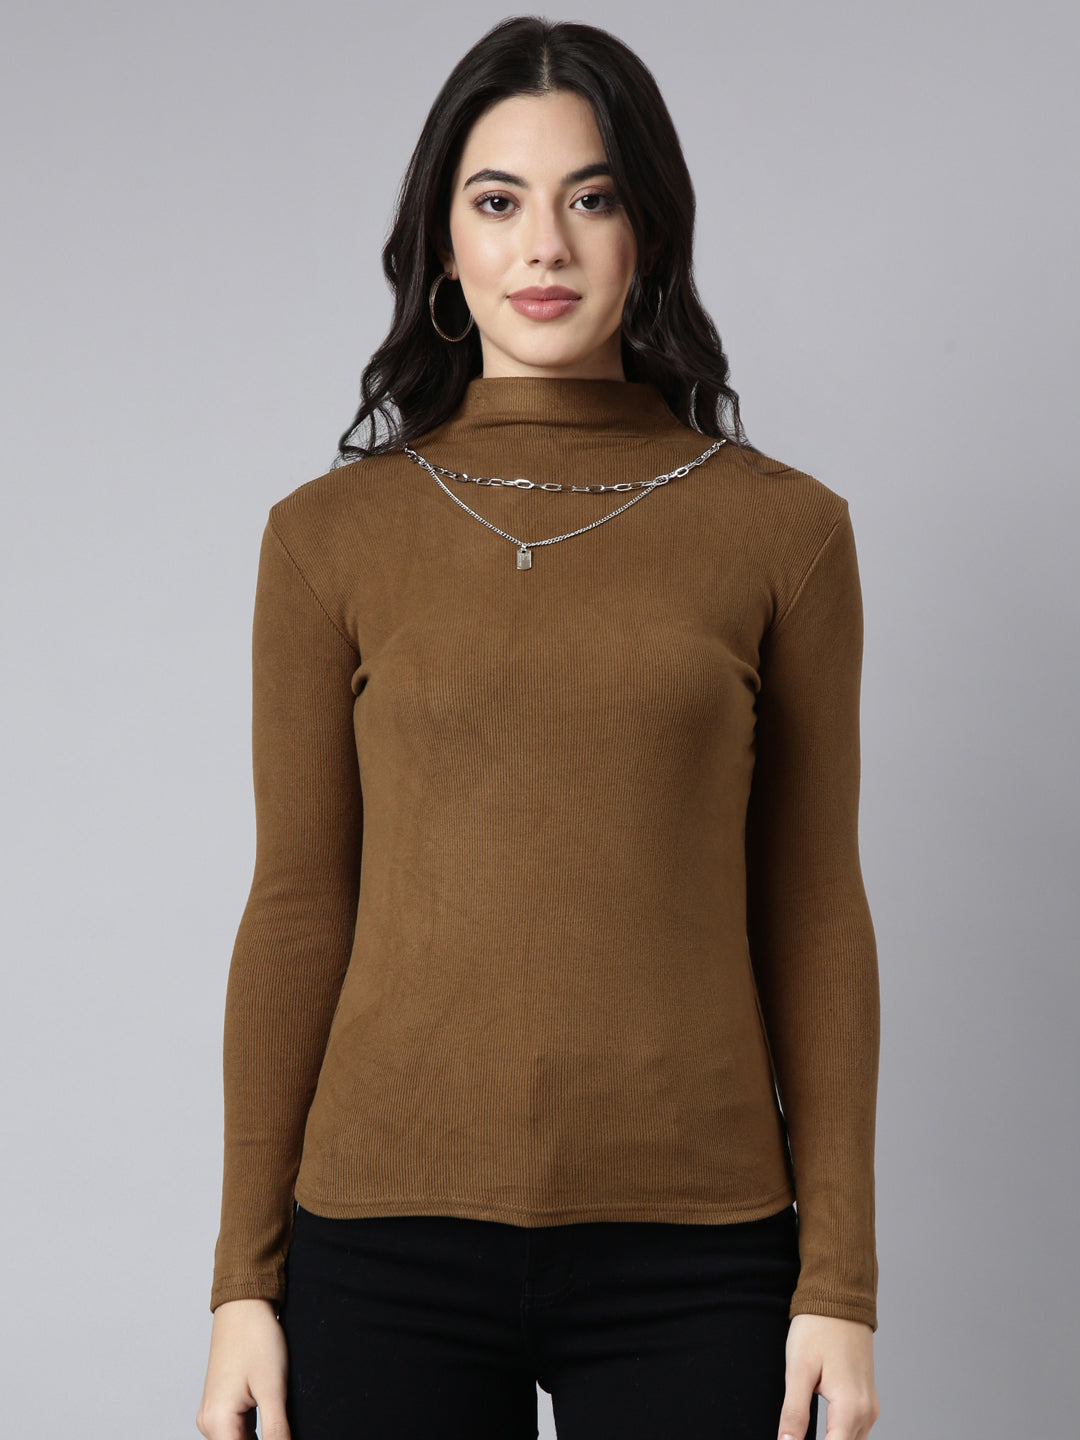 Women Solid Olive Top Comes With Chain